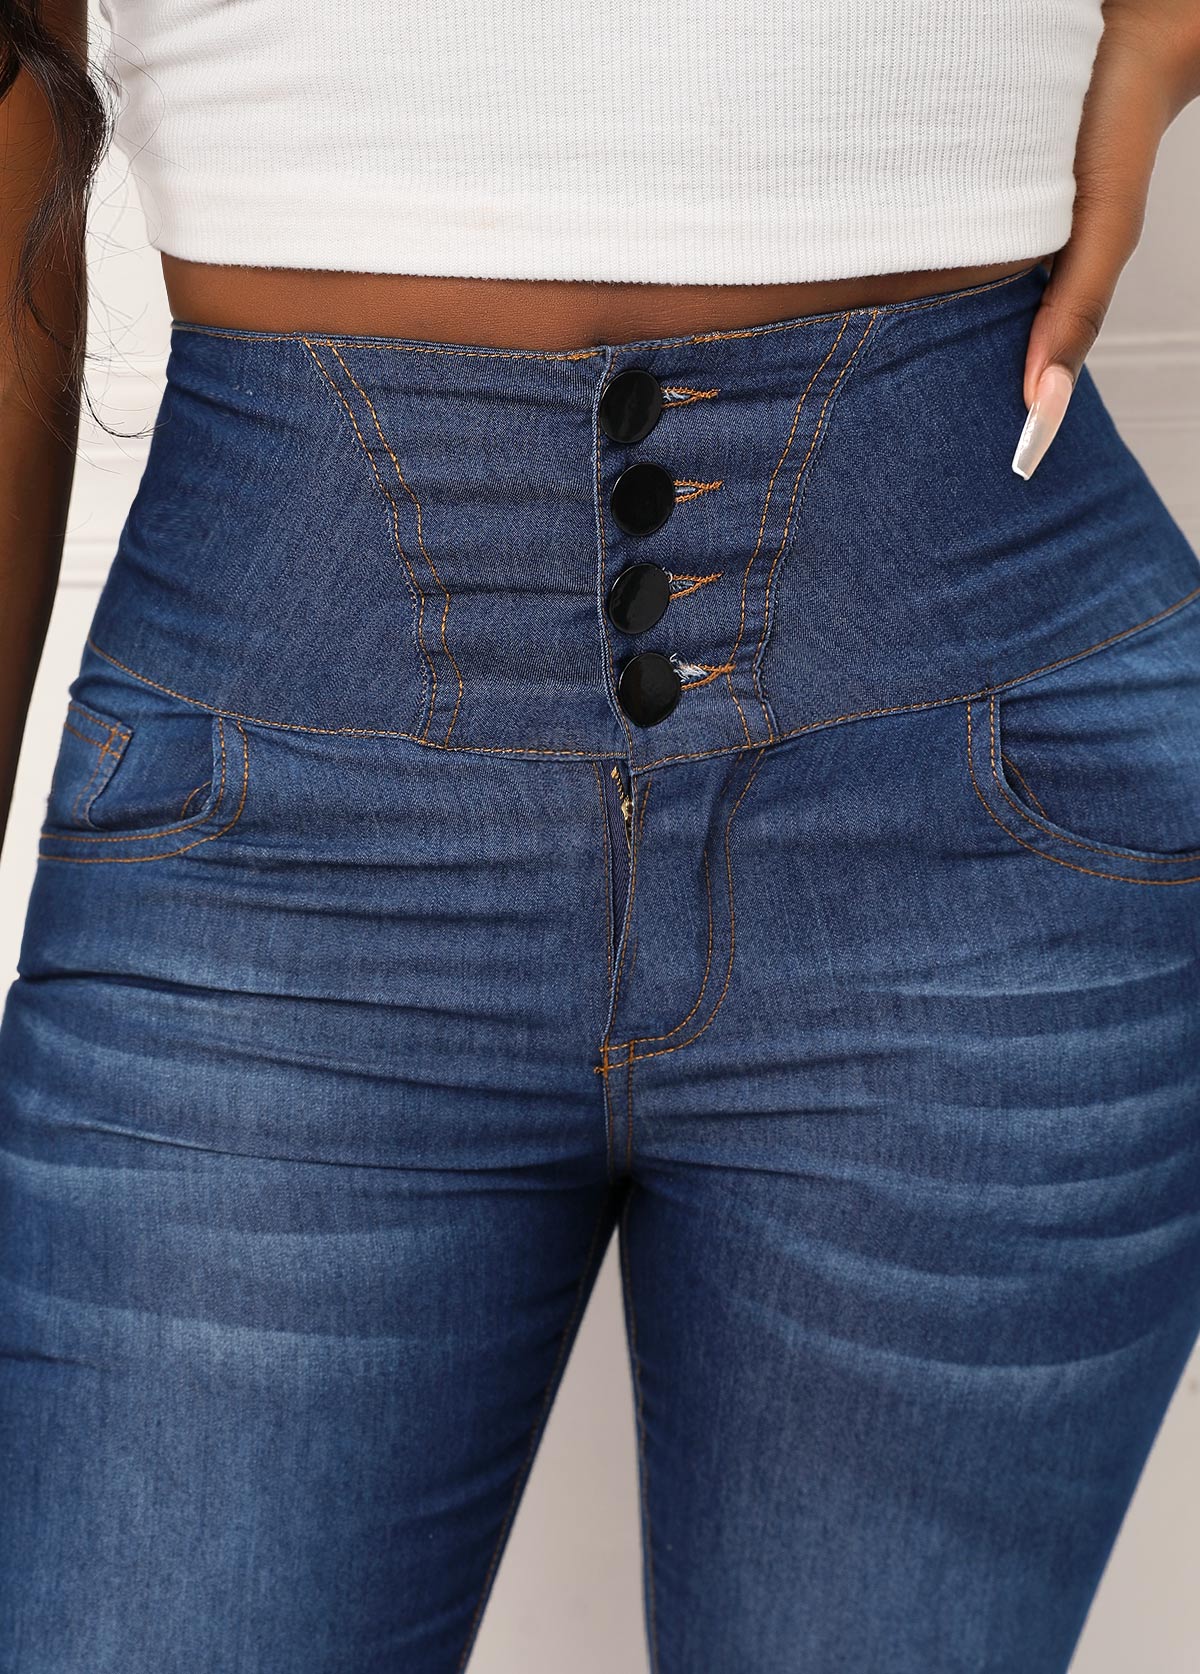 Dark Blue Skinny Button High Waisted Jeans